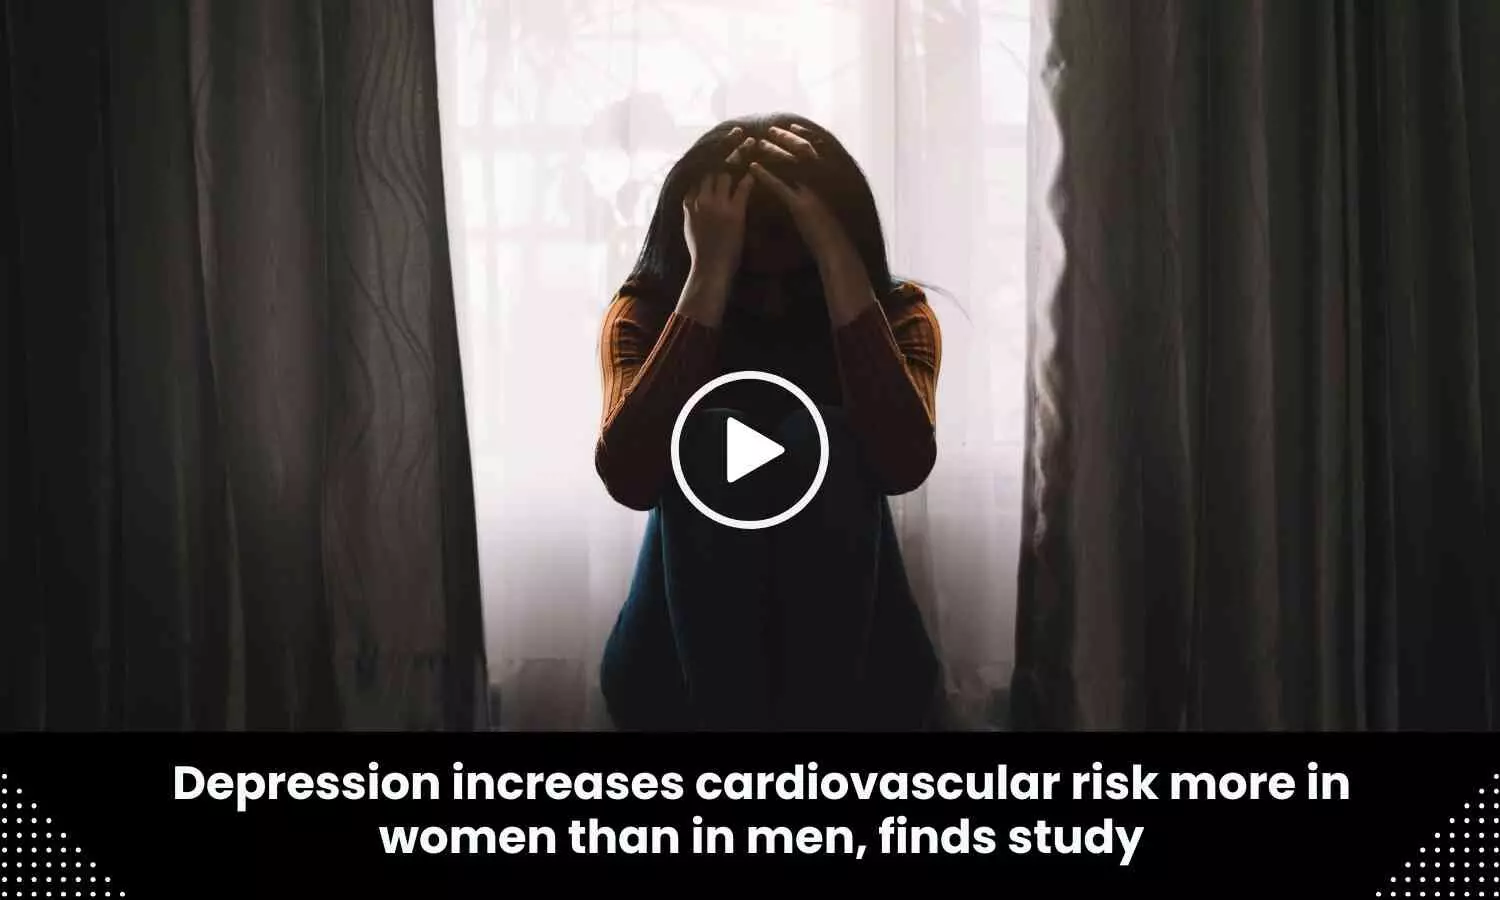 Depression increases cardiovascular risk more in women than in men, finds study